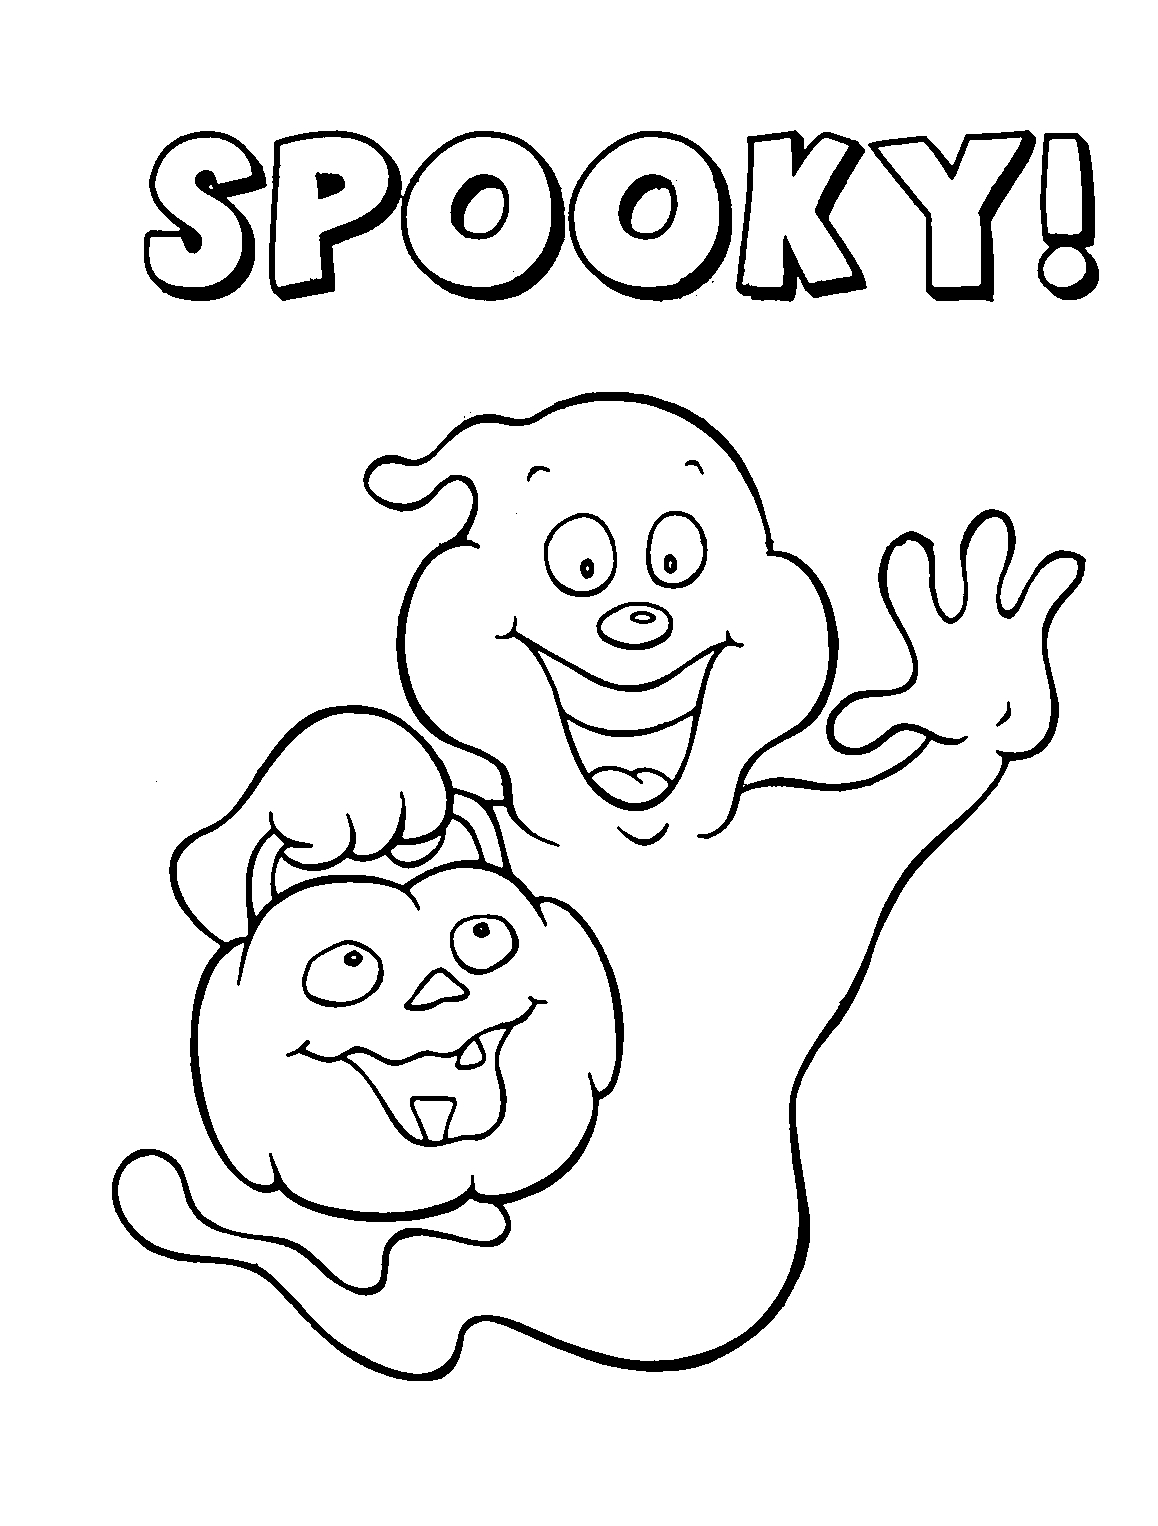 Free Scary Halloween Coloring Pages Spooky Halloween Coloring Pages